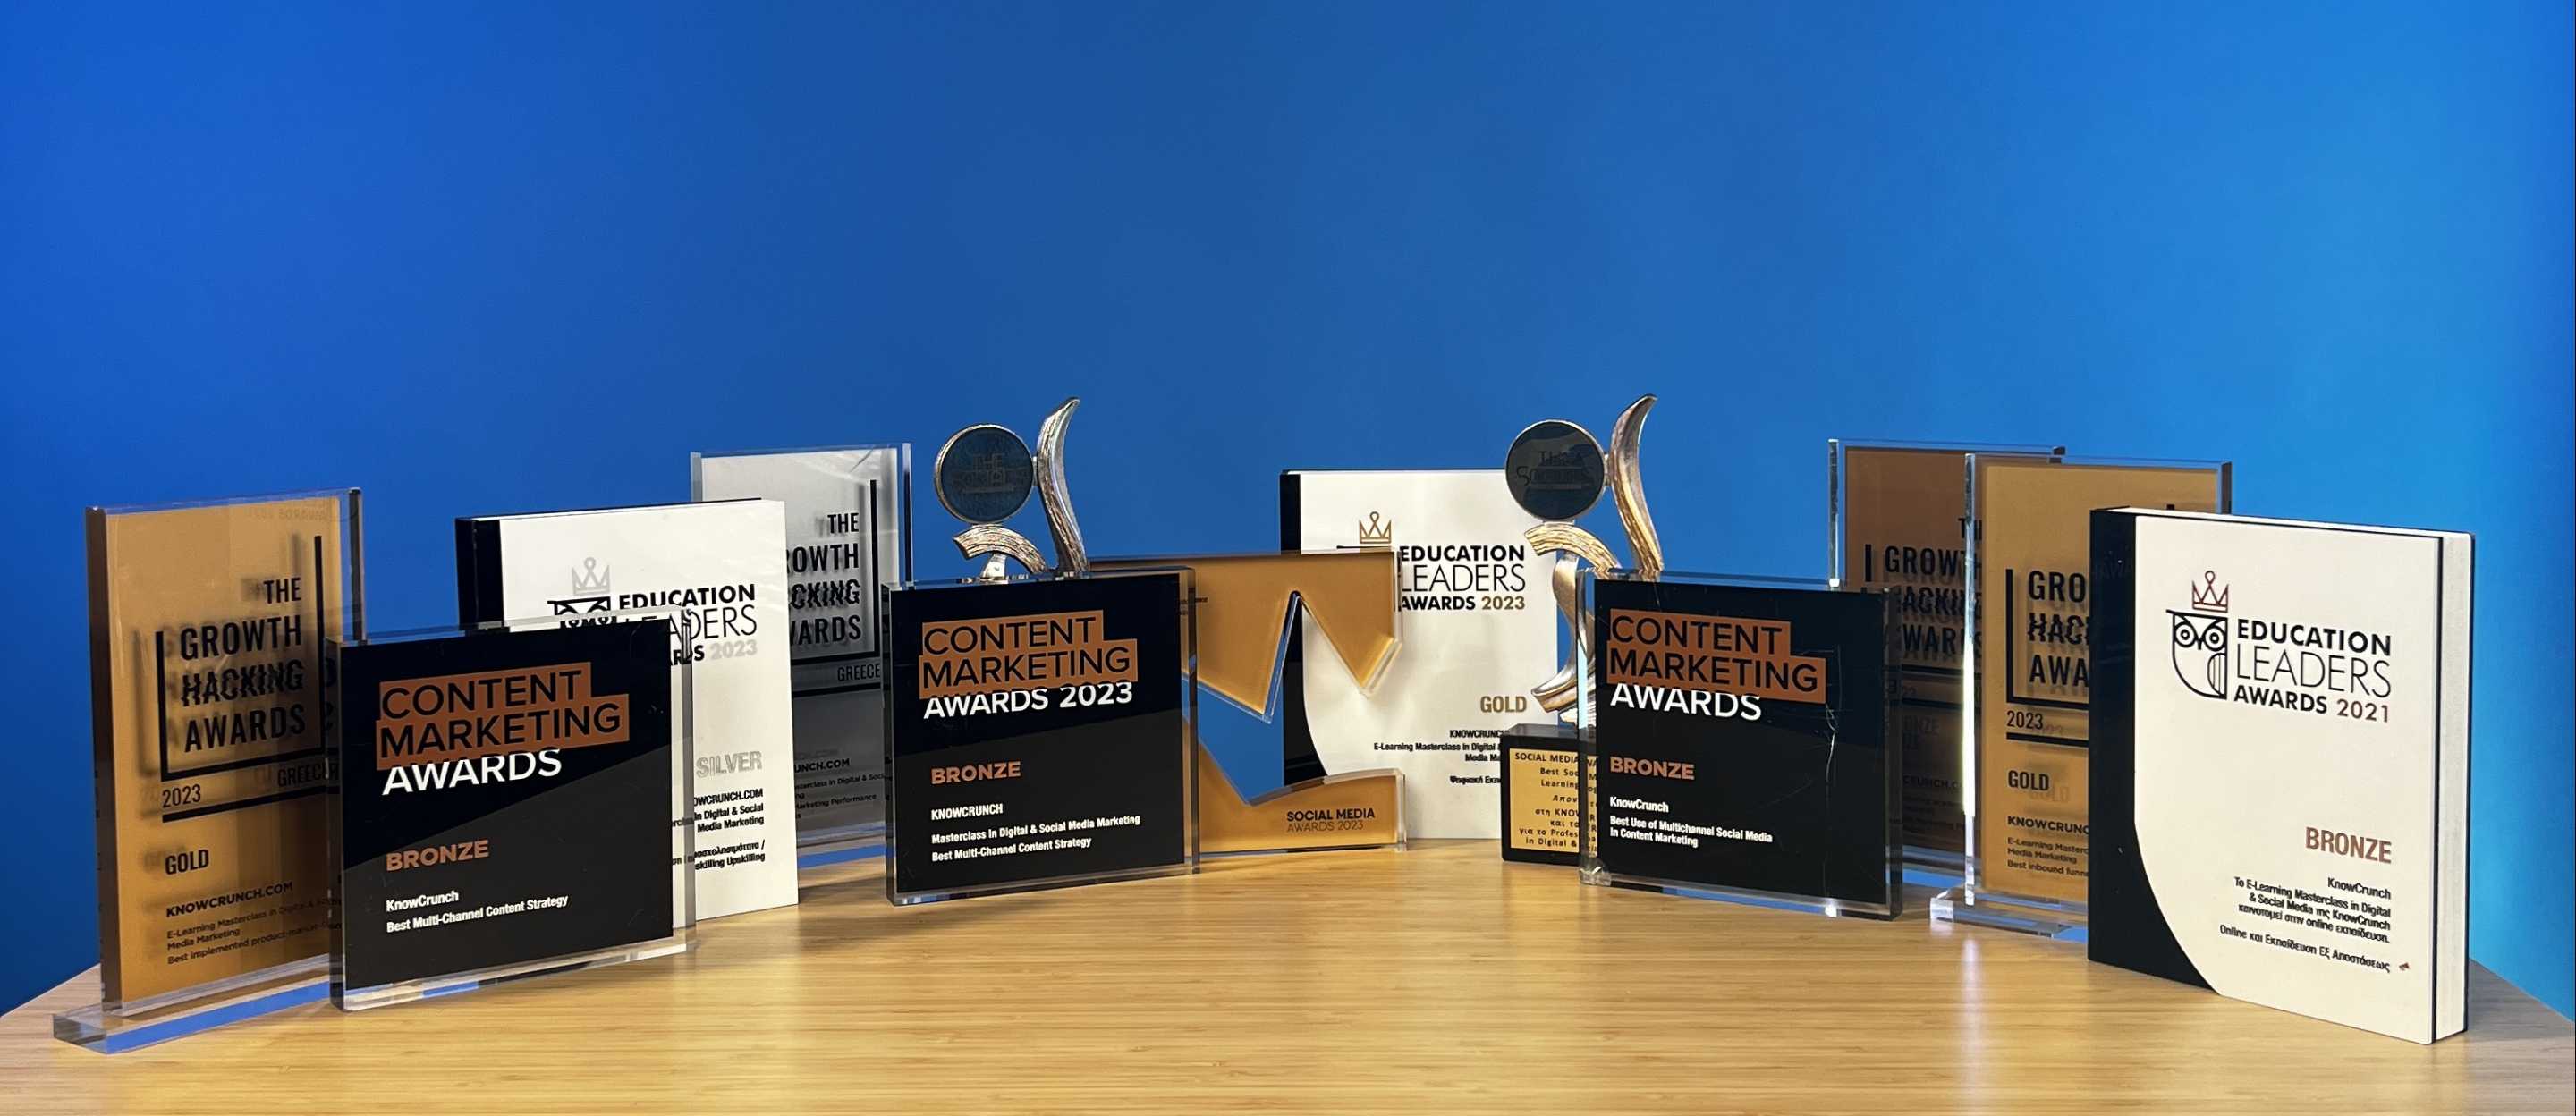 All the Knowcrunch's awards until 2023.